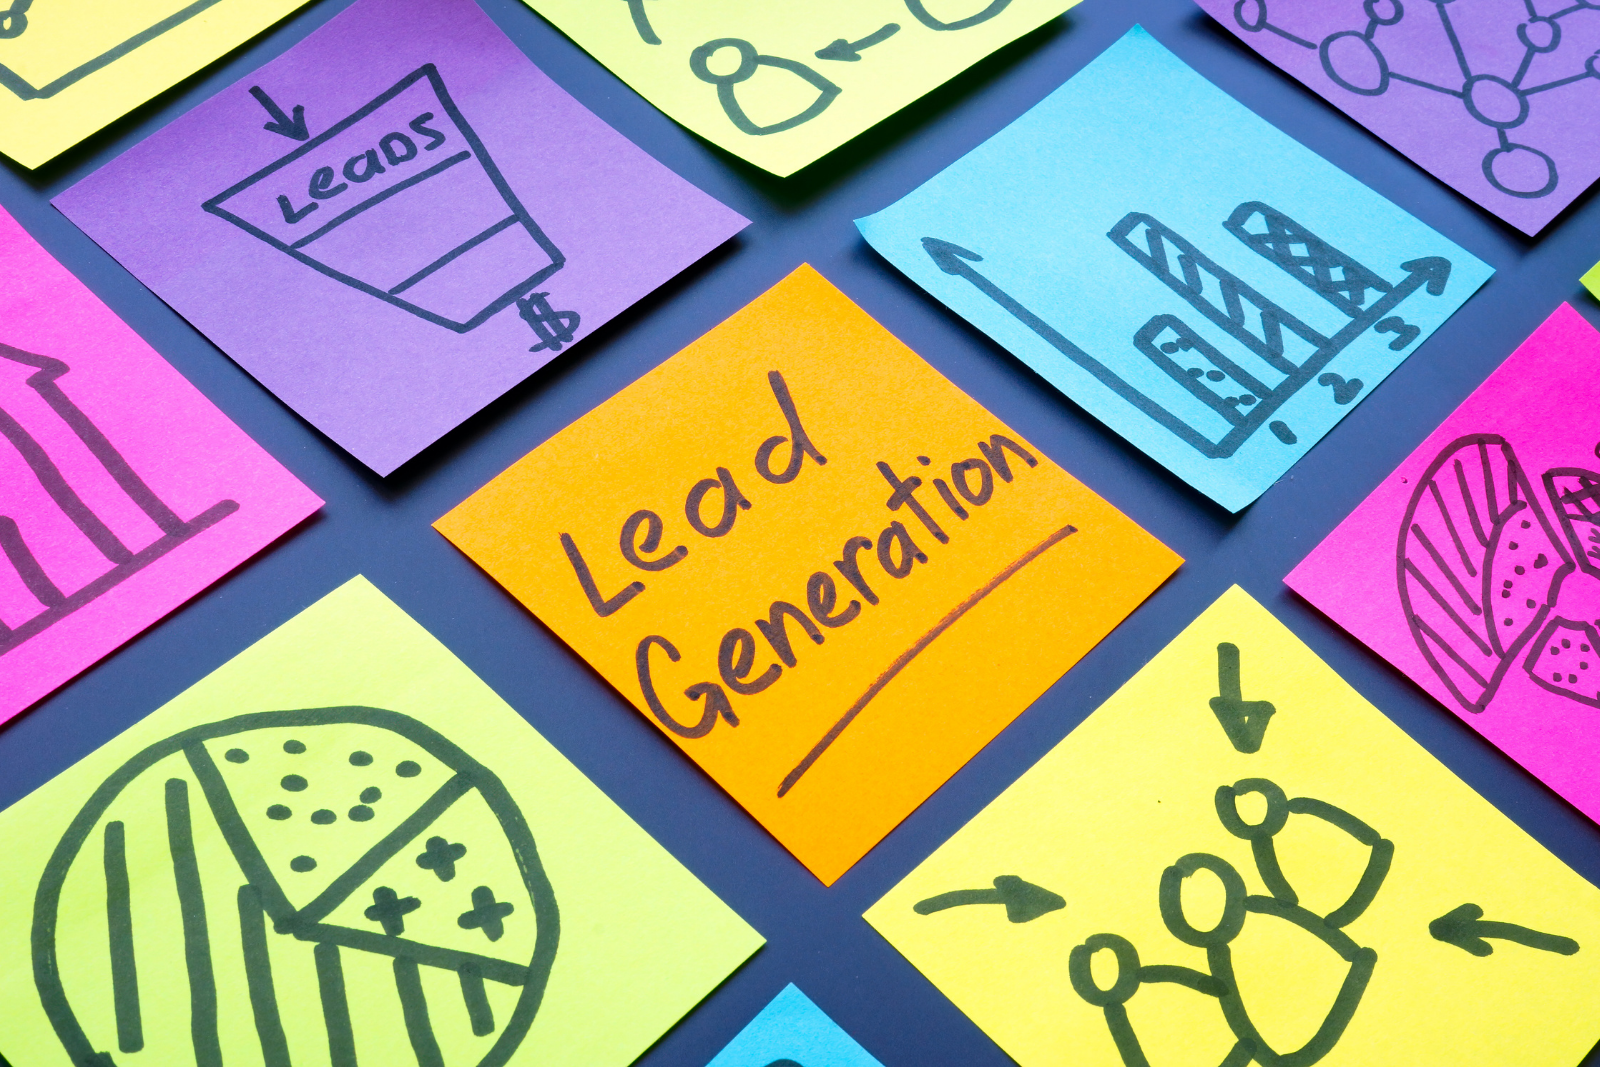 Sticky notes with "Lead Generation" written on them